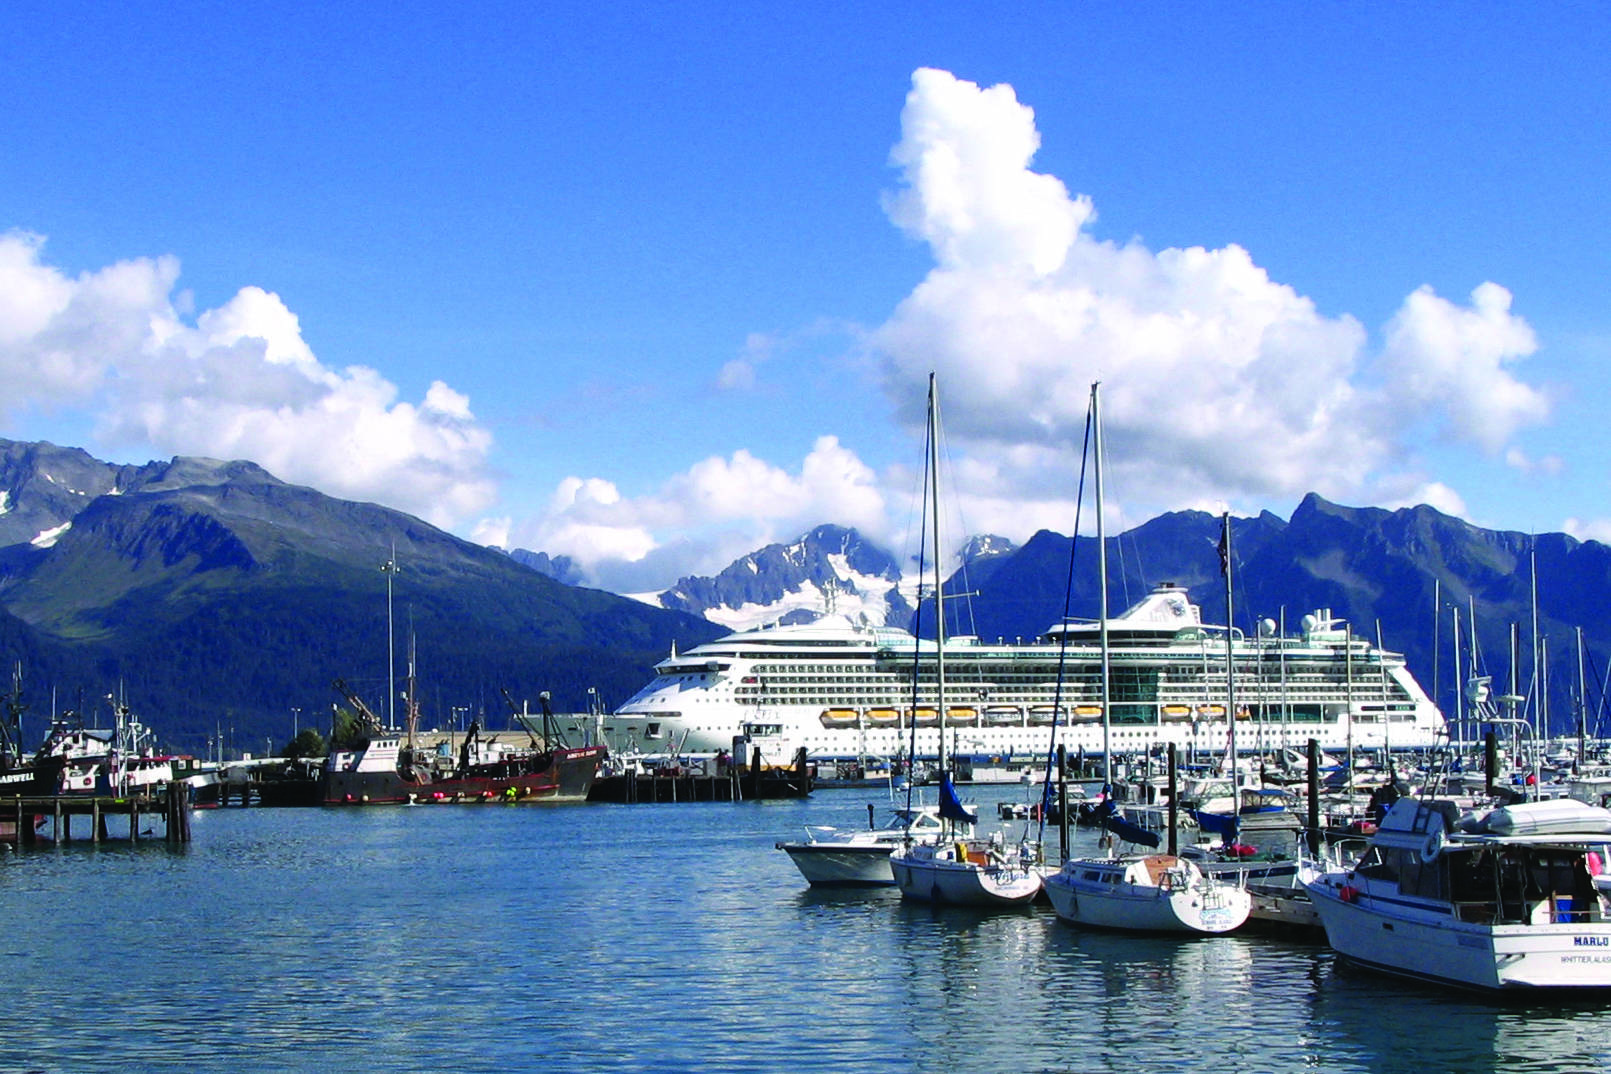 This Sept. 7, 2007, file photo shows Royal Caribbean’s “Radiance of the Seas” docked in Seward. (AP Photo/Beth J. Harpaz, File)